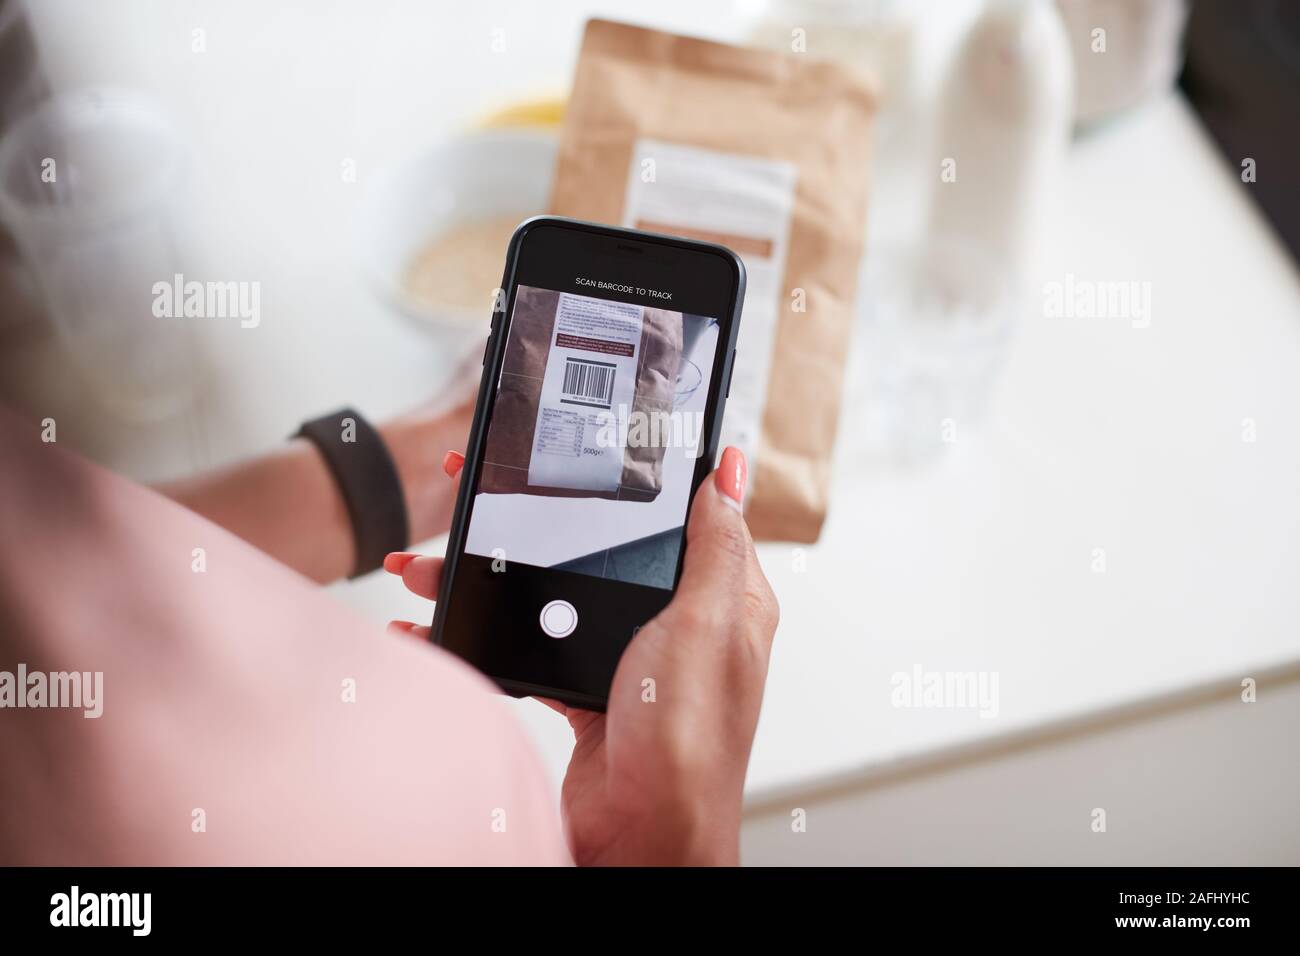 Woman Wearing Fitness Clothing Scanning QR Code On Food Packaging To Find Nutritional Information Stock Photo